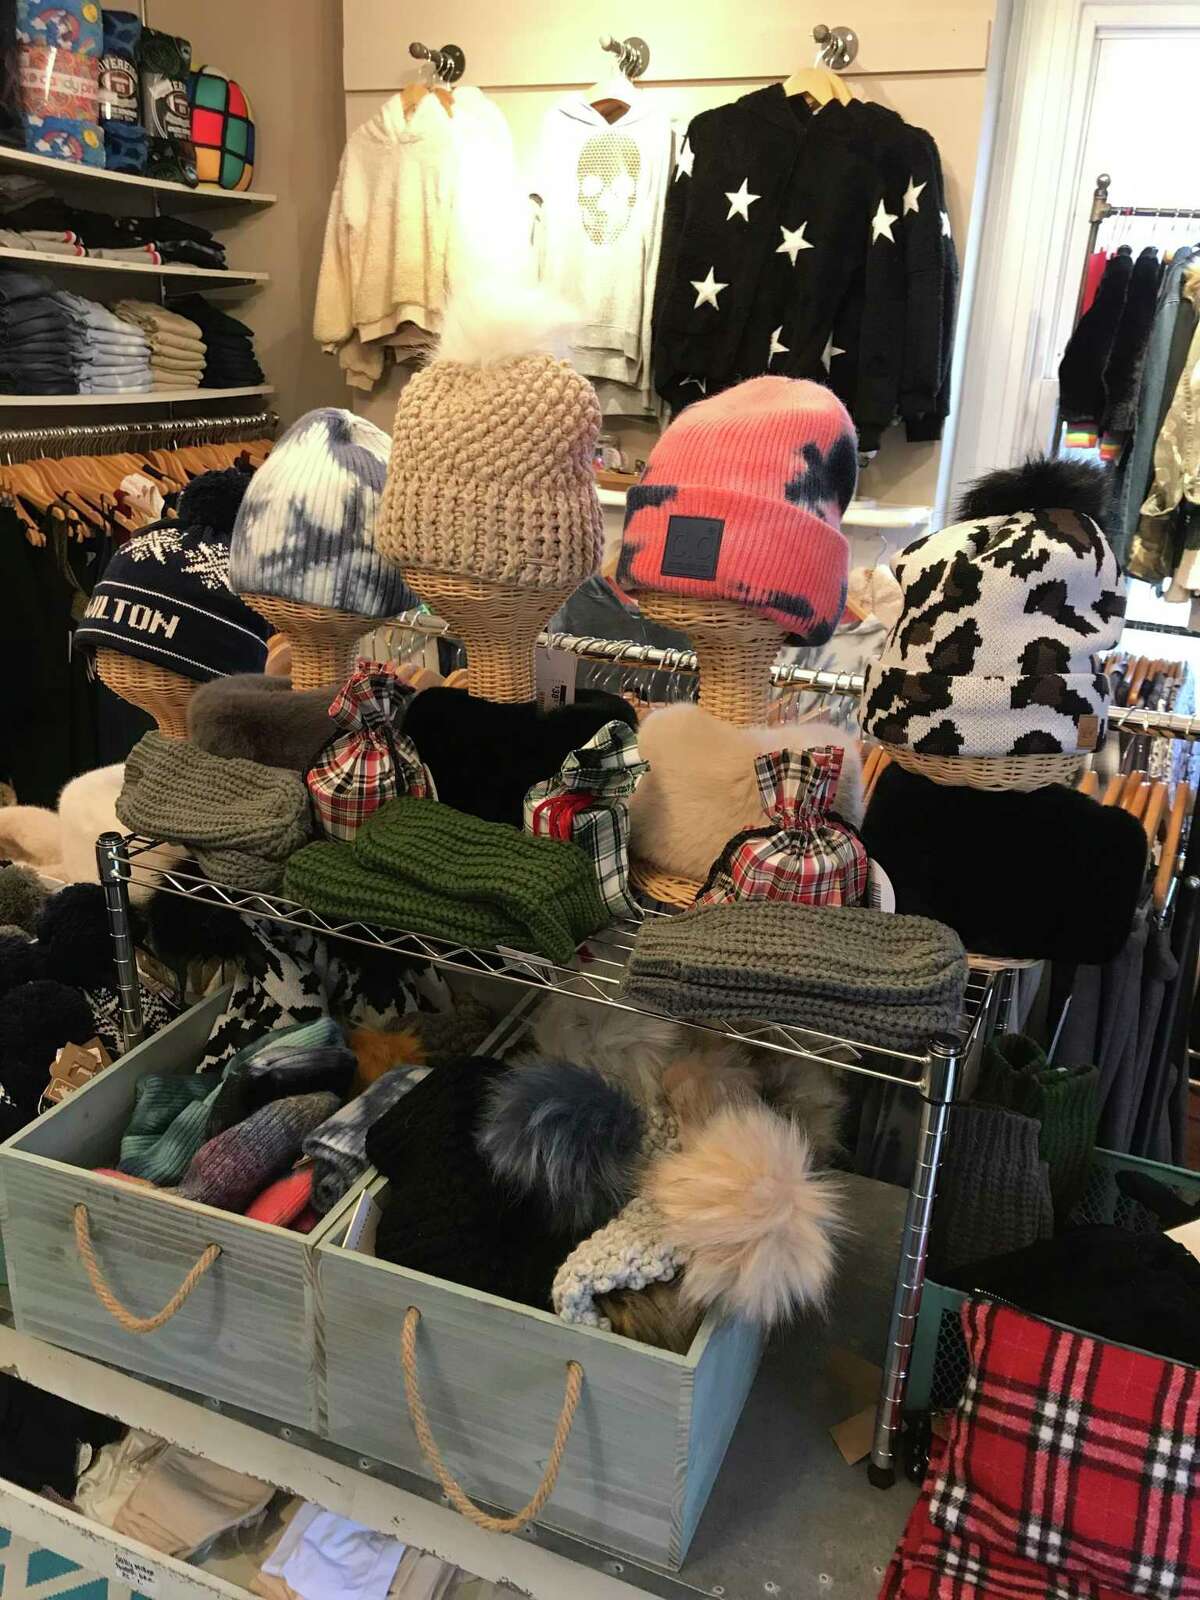 Blue Star Bazaar has opened a pop up shop in Wilton Center. The temporary shop is in Old Post Office Square near Mint Nails and Connecticut Coffee and Grill. Pictured in the business’s 237 Danbury Road location.